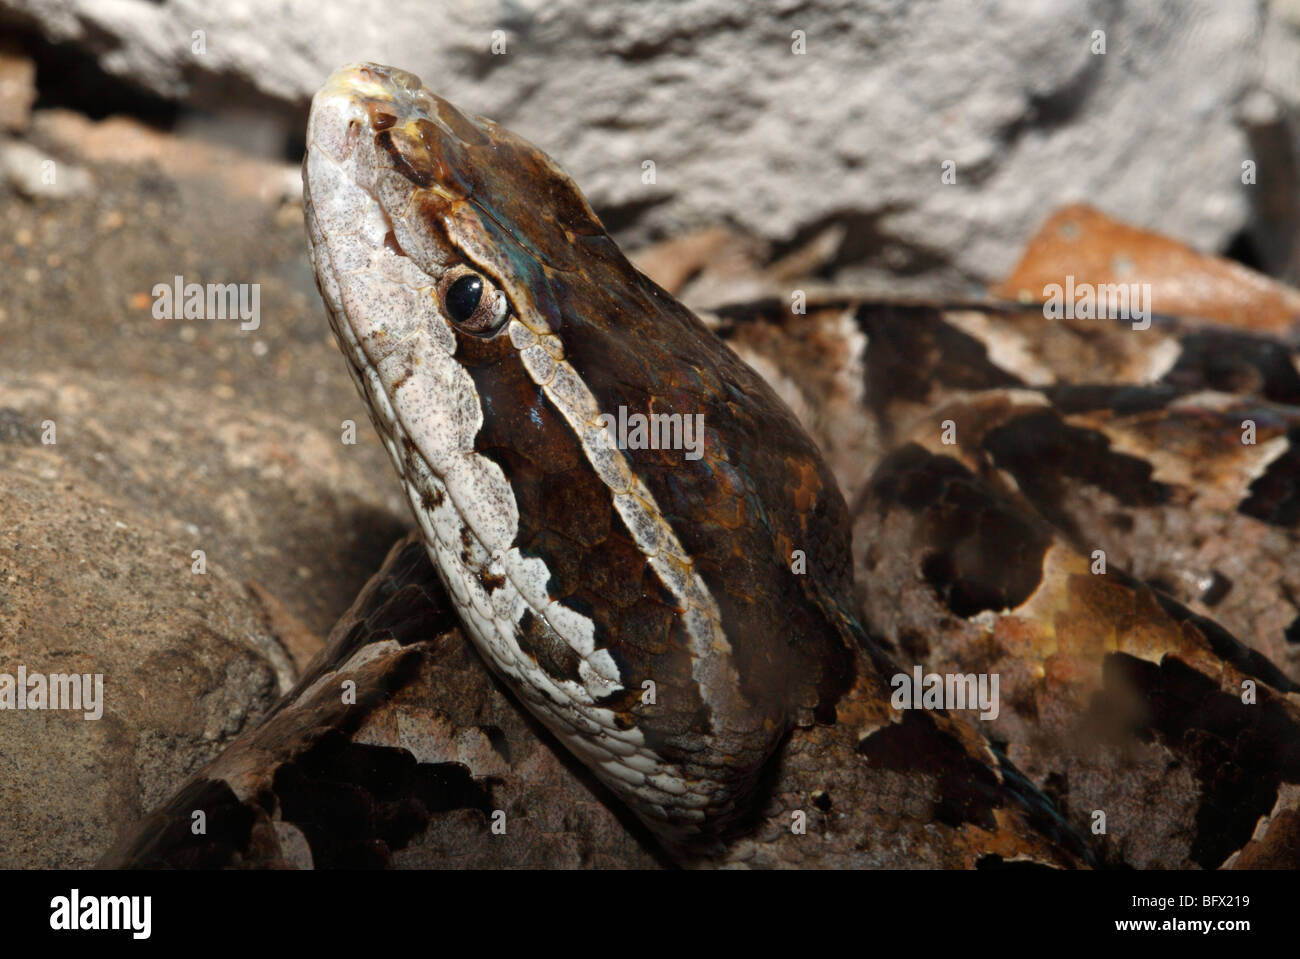 Malayan Pit Viper, Calloselasma rhodostoma. Endemic to south east Asia, this venomous snake is bad tempered and is responsible for many bites Stock Photo